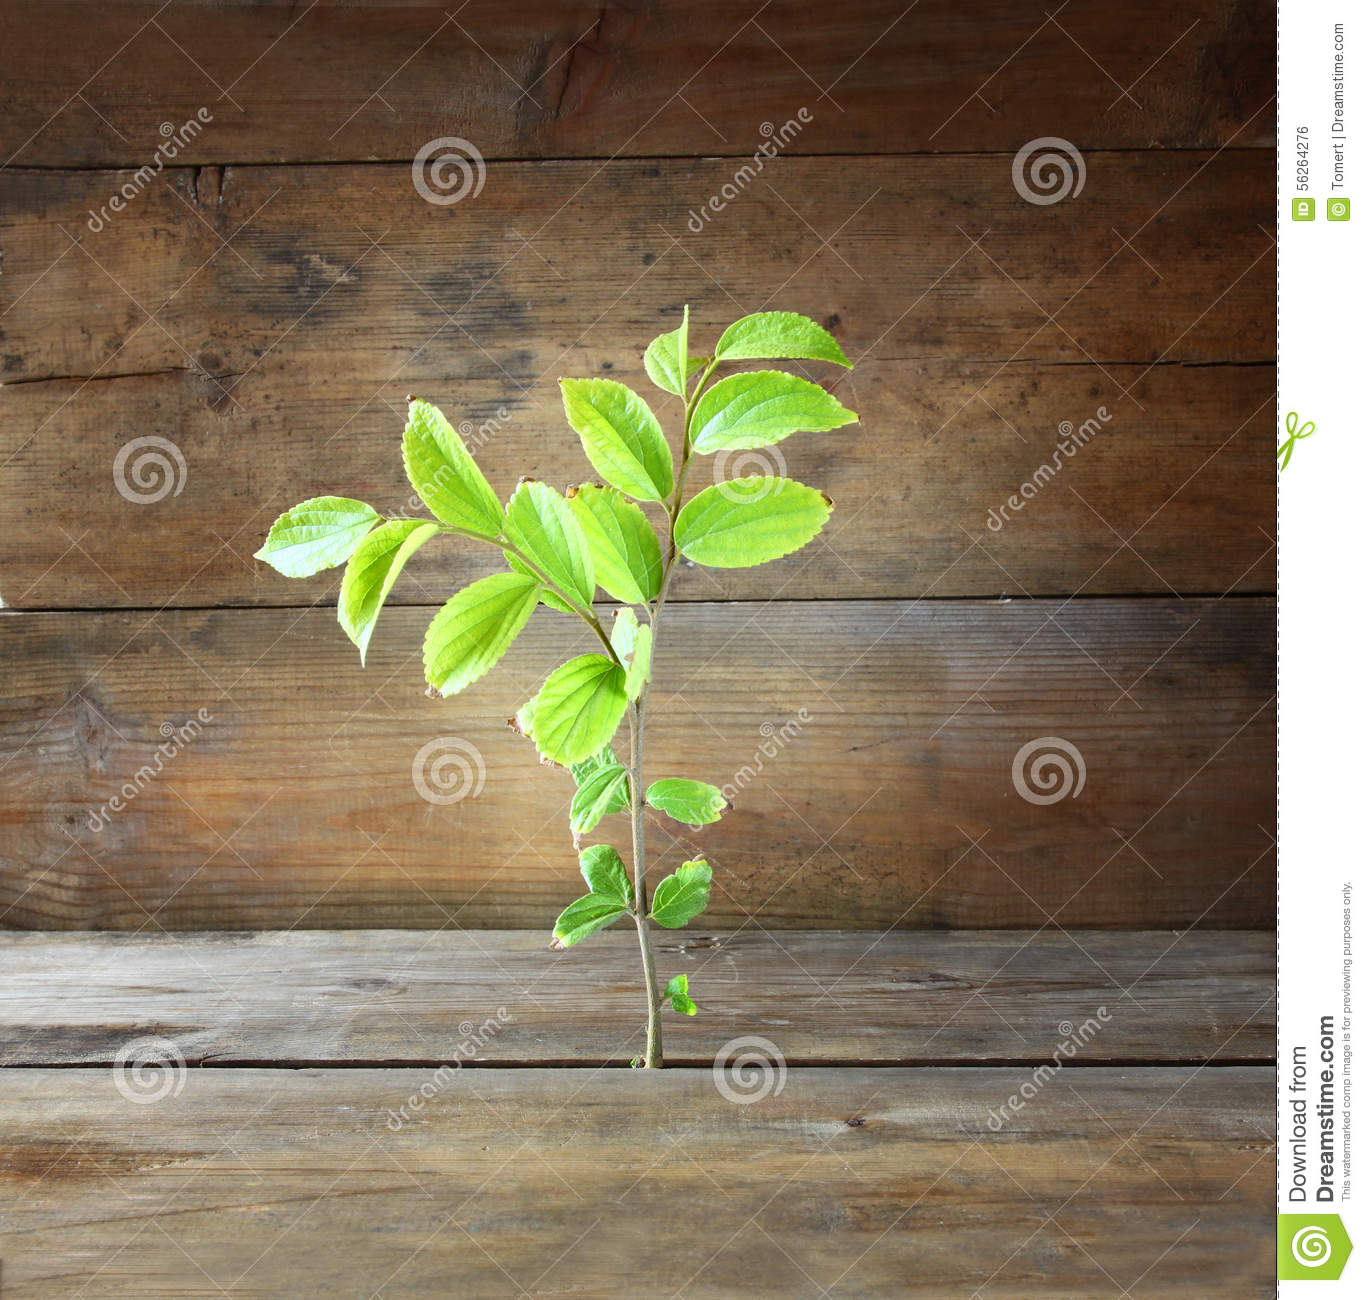 Plant Grows In Old Wood Crack And Symbolizes Renewal And Freshness.